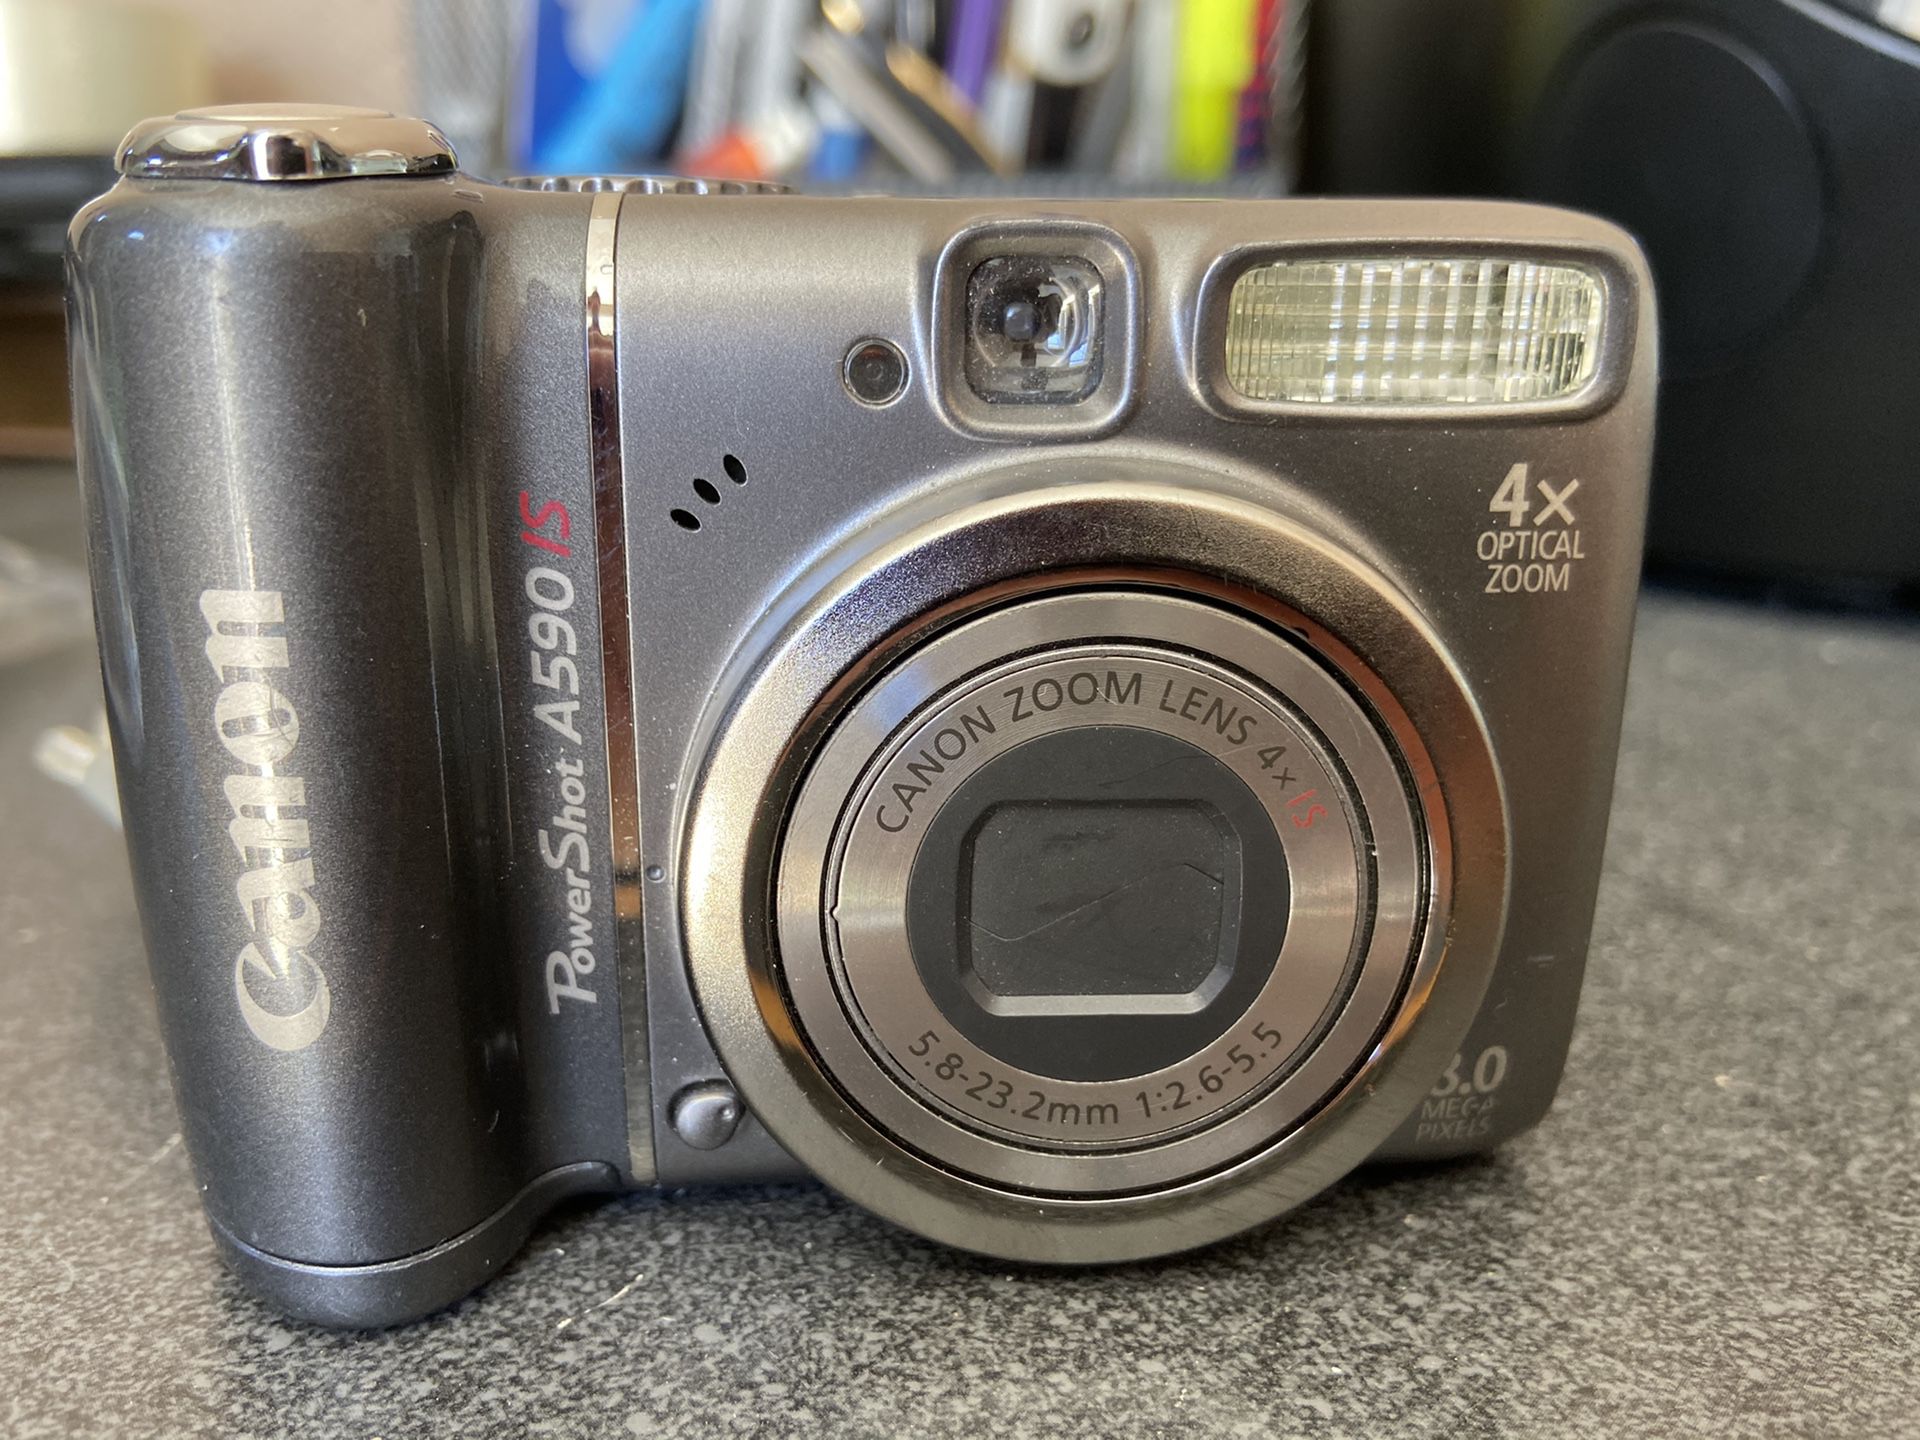 Canon A590 IS Digital Camera - Great working condition